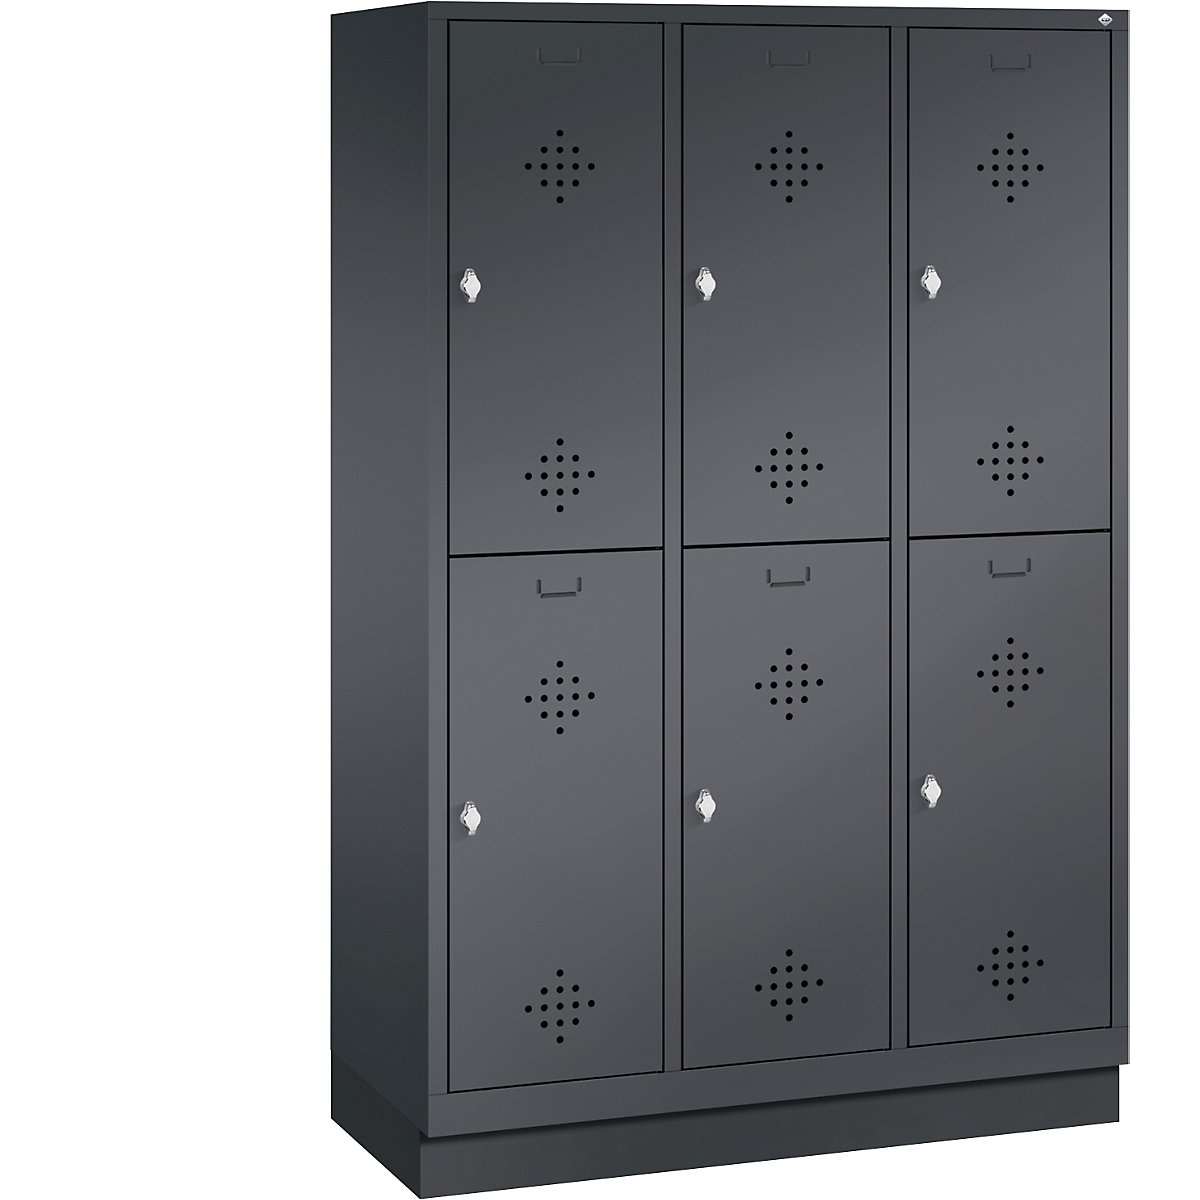 CLASSIC cloakroom locker with plinth, double tier – C+P, 3 compartments, 2 shelf compartments each, compartment width 400 mm, black grey-7